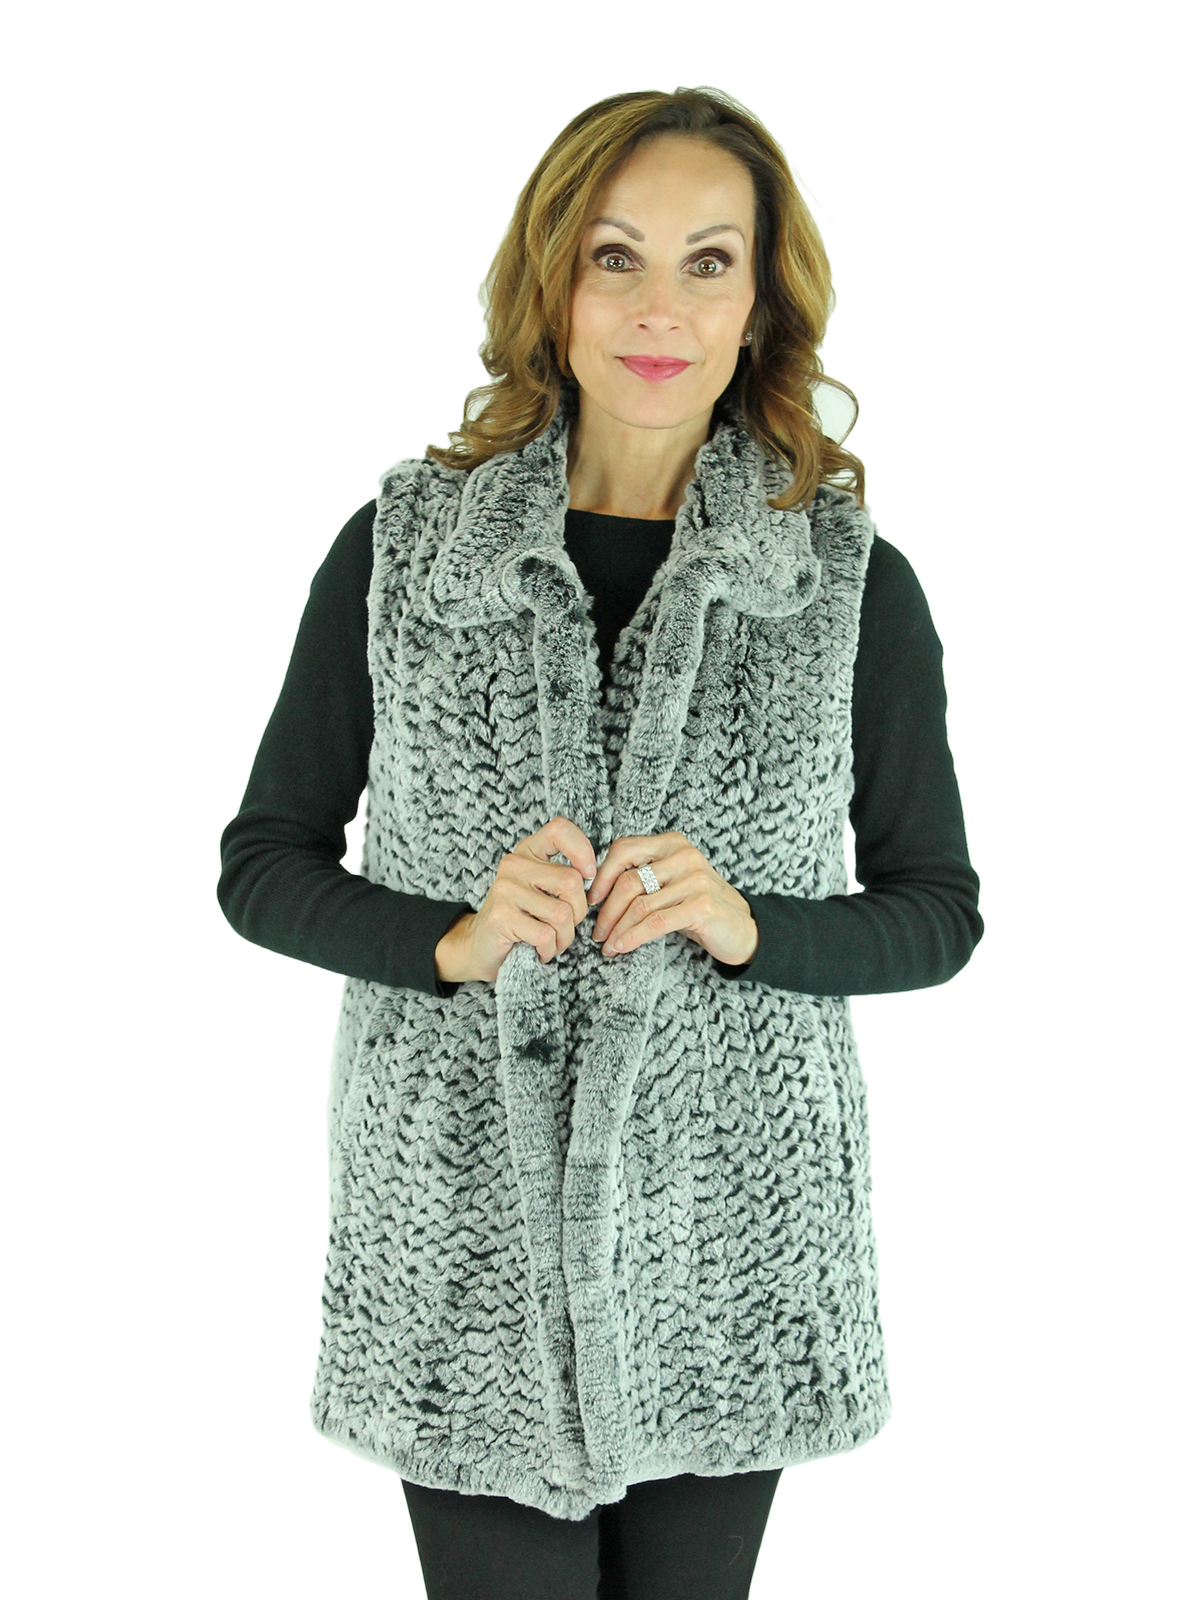 Woman's Chinchilla Dyed Knitted Rex Rabbit Fur Vest